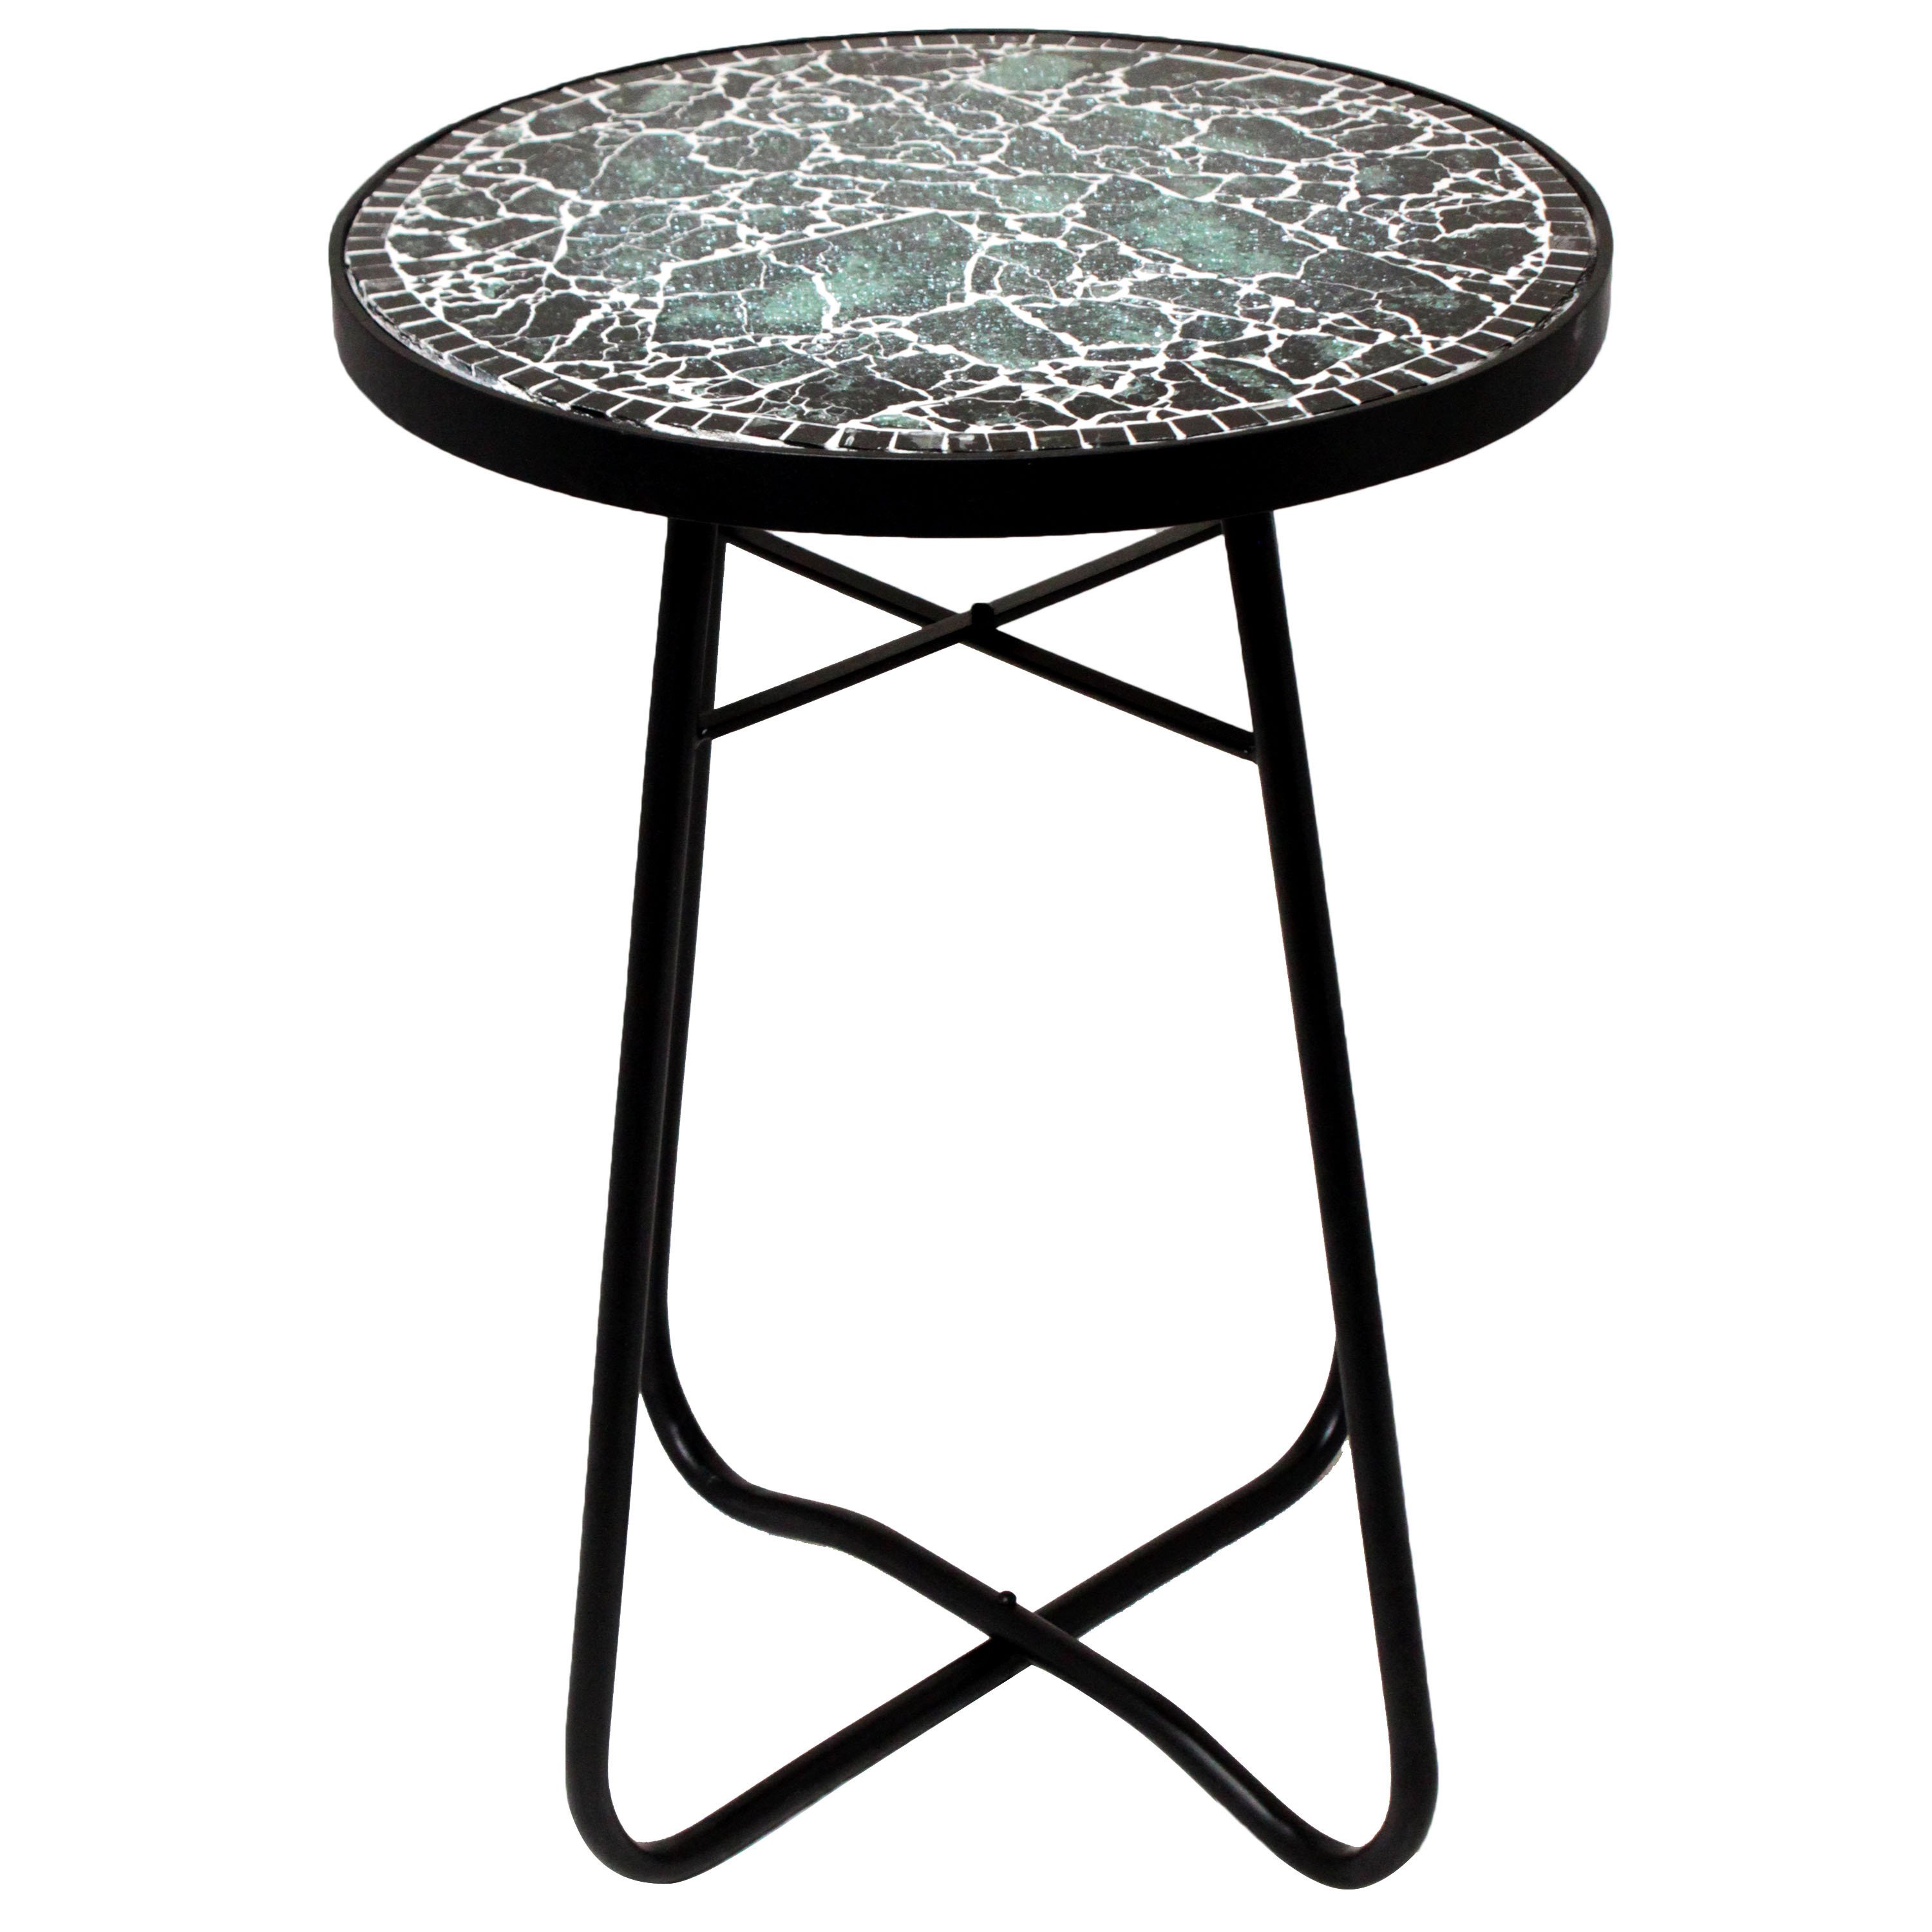 black mosaic round patio side accent table free shipping square outdoor today nautical themed floor lamps garden storage solutions vintage metal glass dining and chairs clearance